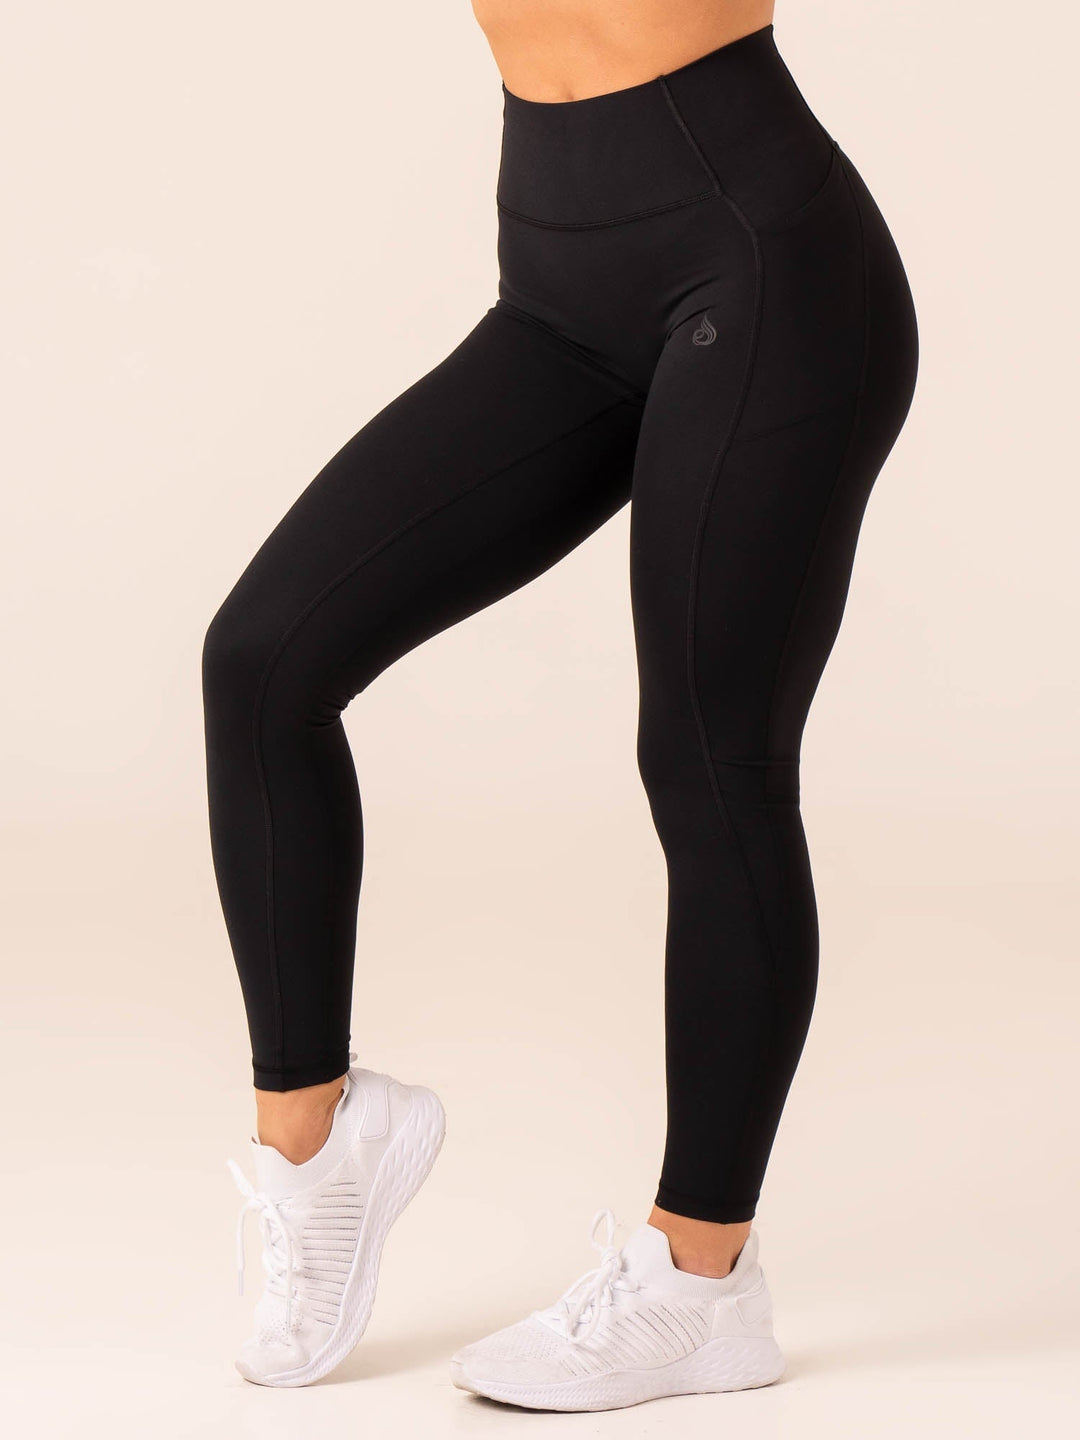 14 Best Black Leggings With Pockets | The Healthy